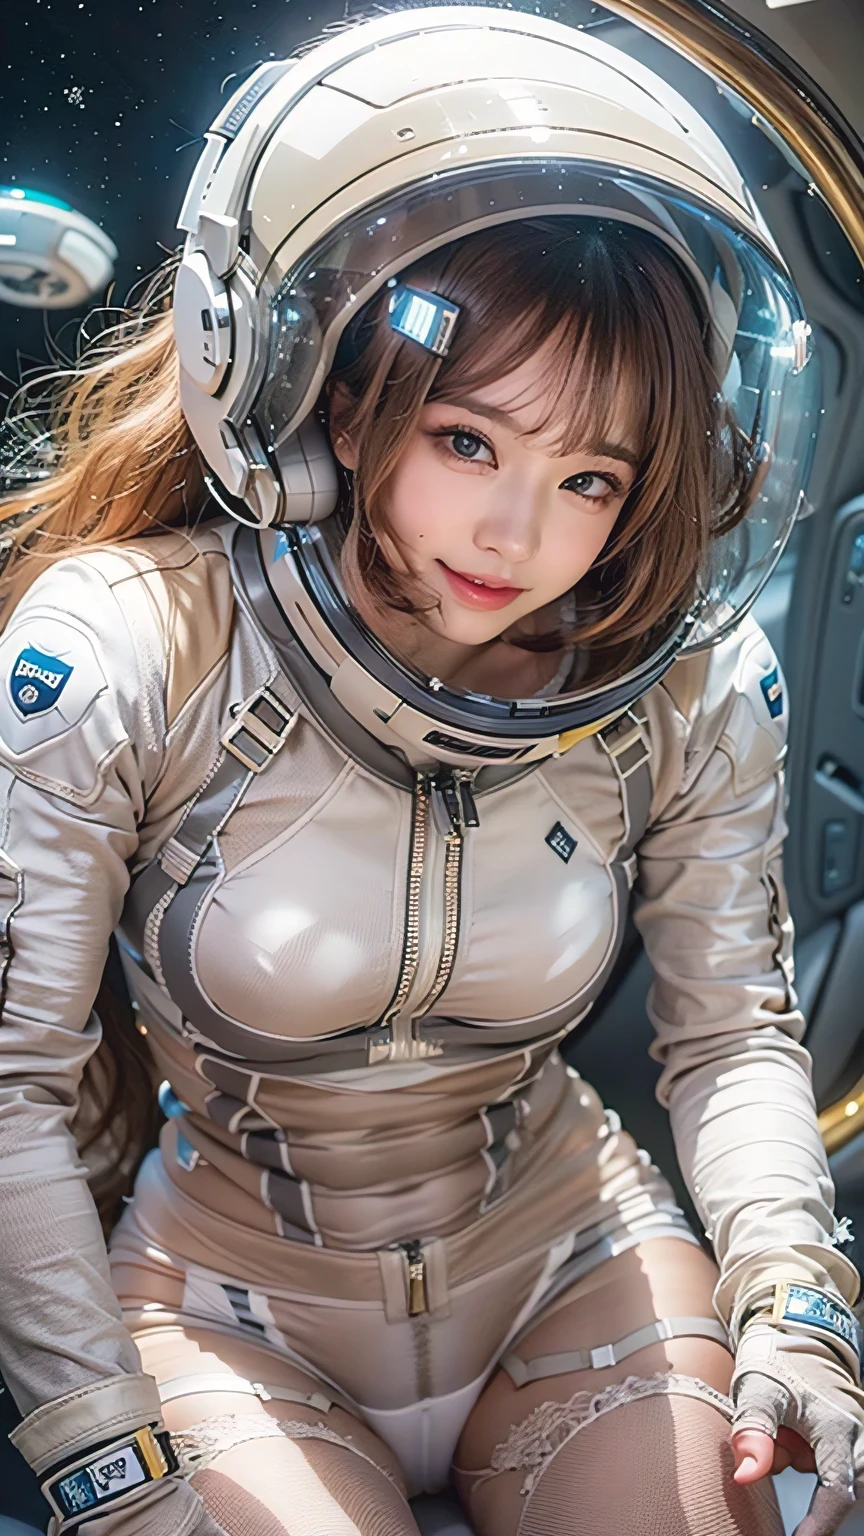 realistic, 4K, top quality、masterpiece、Ultra A high resolution、(realistic:1.4)、Full body beautiful woman１、23 year old full body woman, Beautifully detailed eyes and skin、smile、happy expression, smile towards you, ((very large breasts)), My heart flows down due to gravity, light brown long hair、Full vinyl spacesuit、spacesuit with visible underwear, take off one&#39;s helmet, ((white crop attire, Lace T-panties)), ((No Braza)), inside the spaceship, Iced&snow planet、very erotic pose, woman who wants to have sex, Looking straight at the camera, A woman I want to hug, Obscene pose in weightlessness,